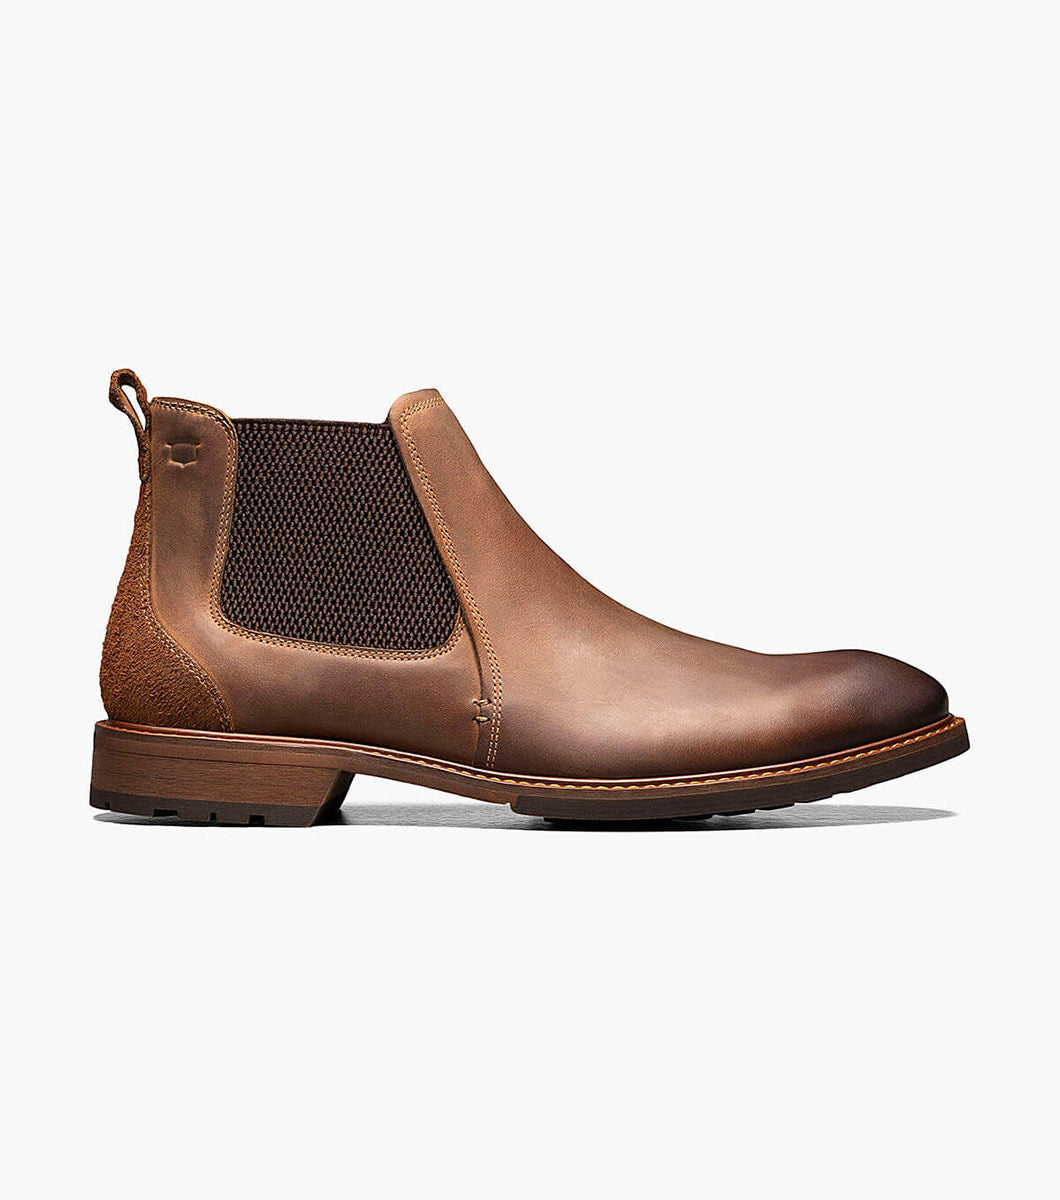 LODGE GORE BOOT BROWN CHESTNUT